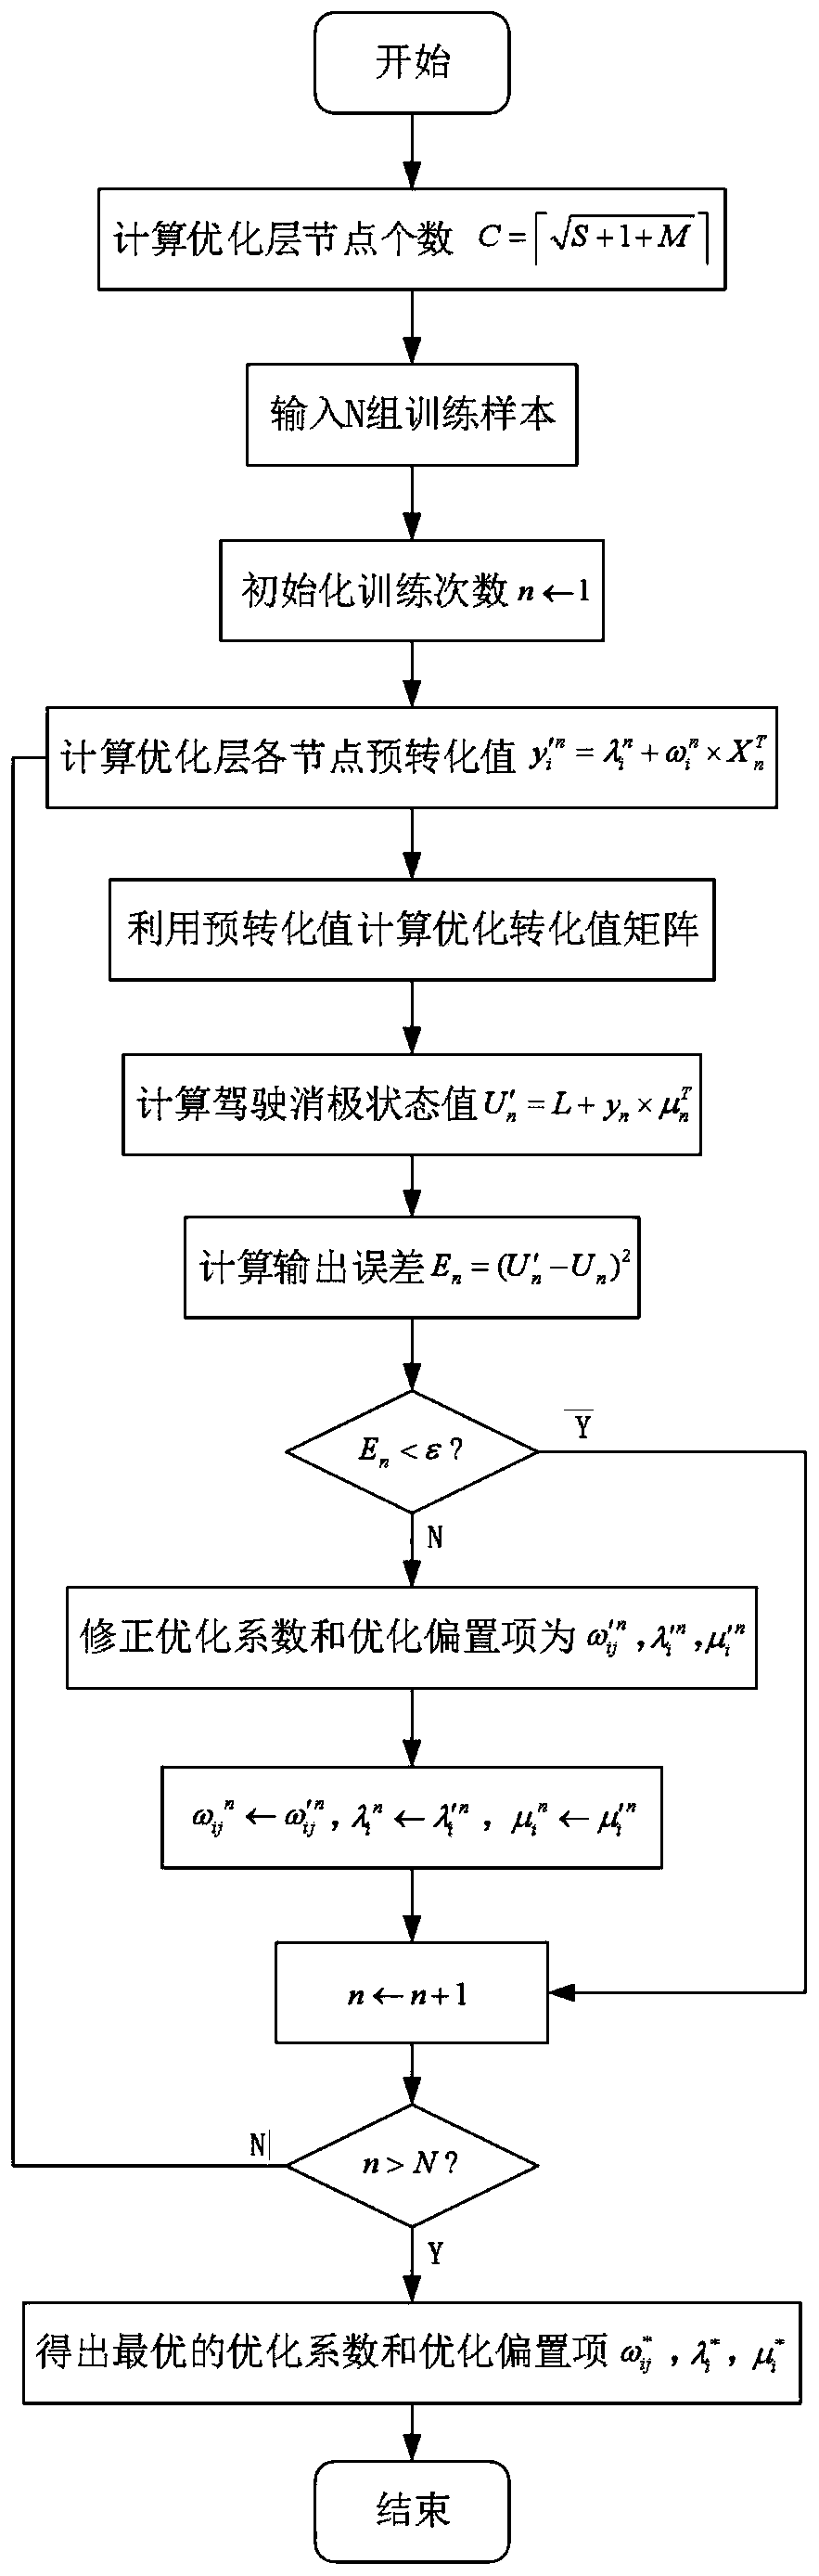 Online Perception Method of Driver's Passive Driving State Based on Hierarchical Network Model